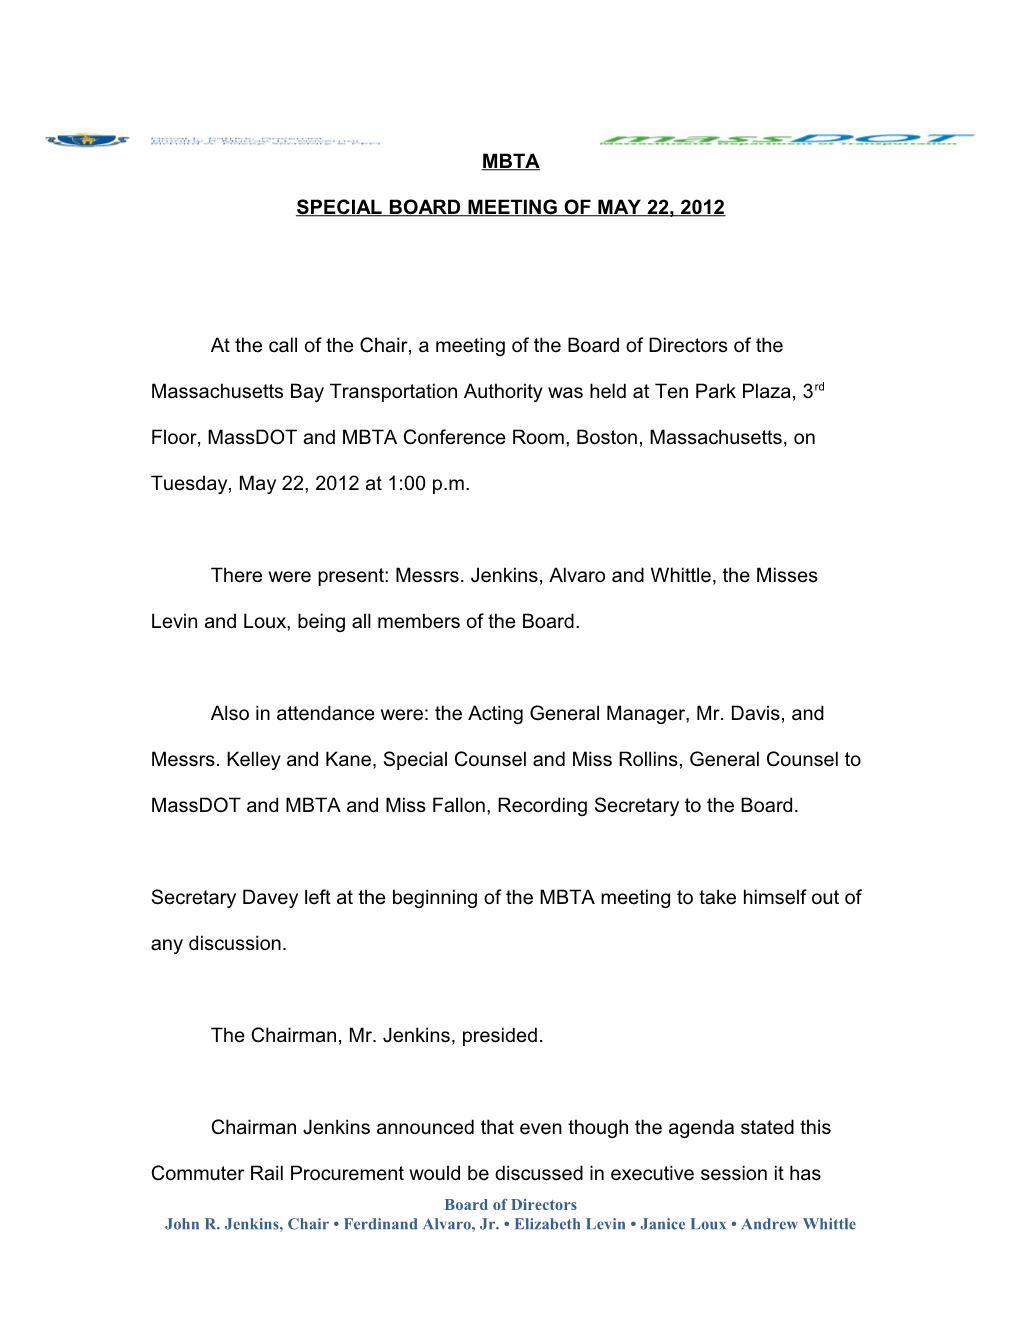 Special Board Meeting of May 22, 2012